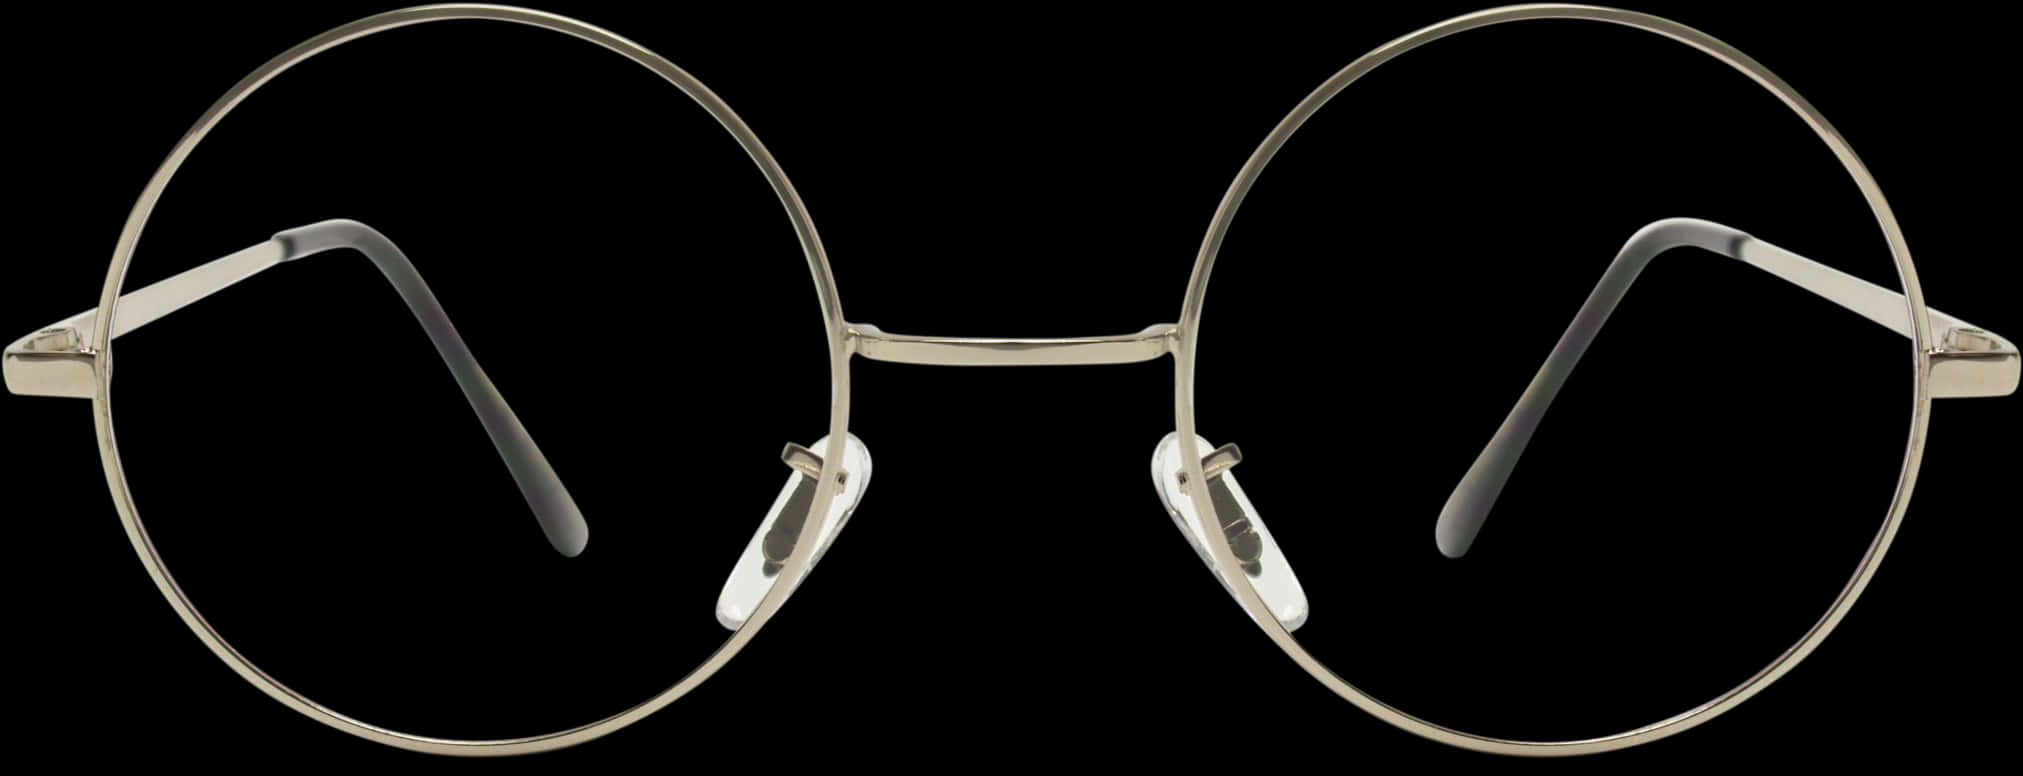 A Pair Of Round Metal Glasses